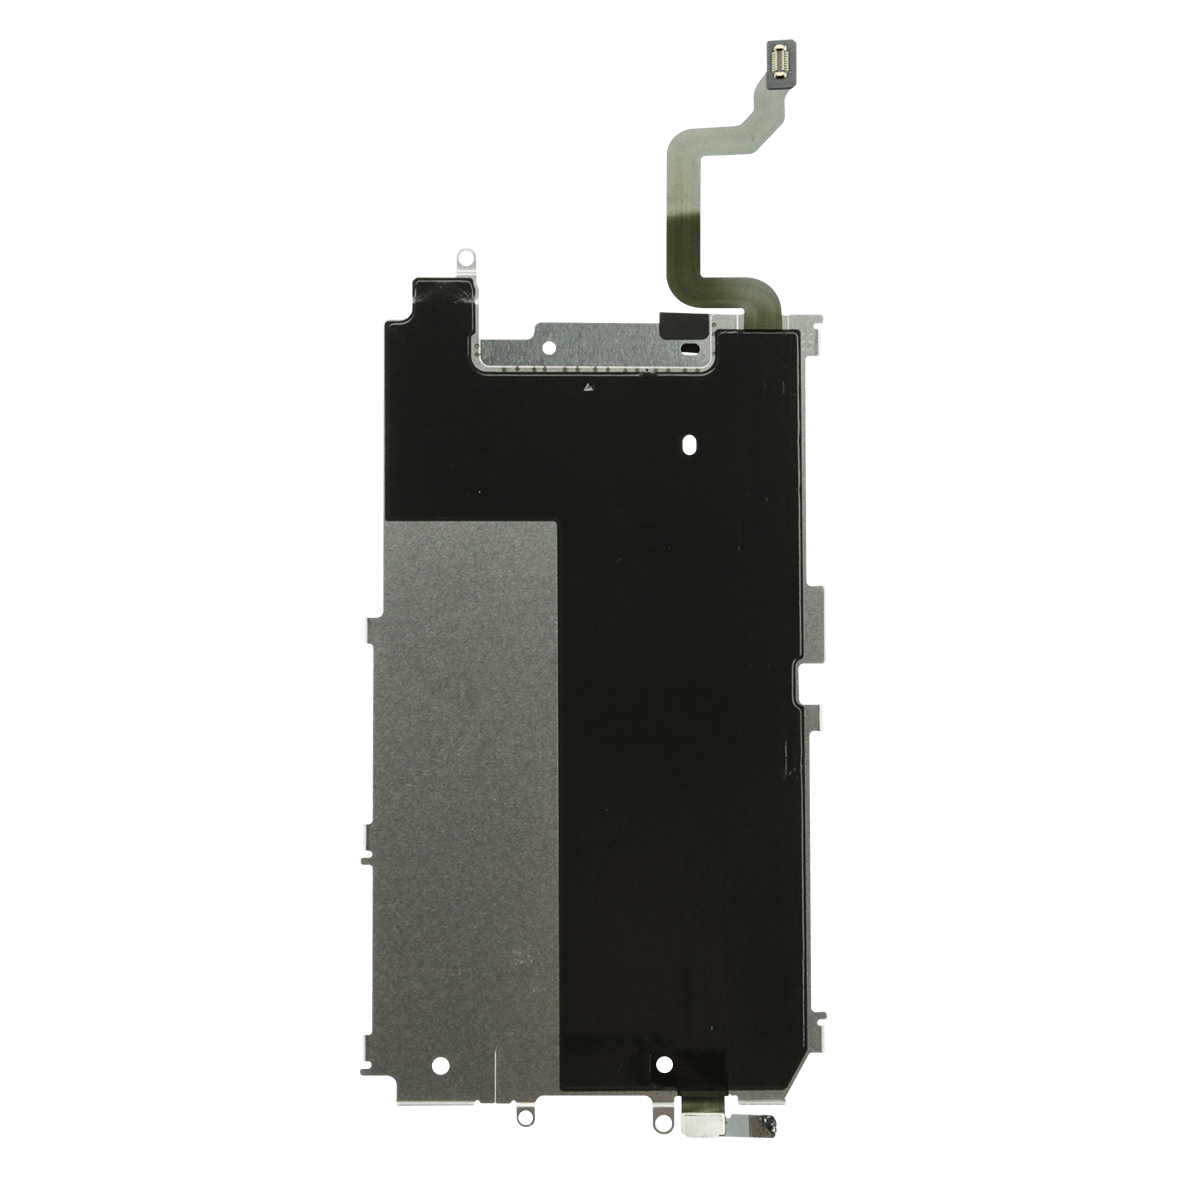 iPhone 6 LCD Shield Plate Replacement with Home Button Cable